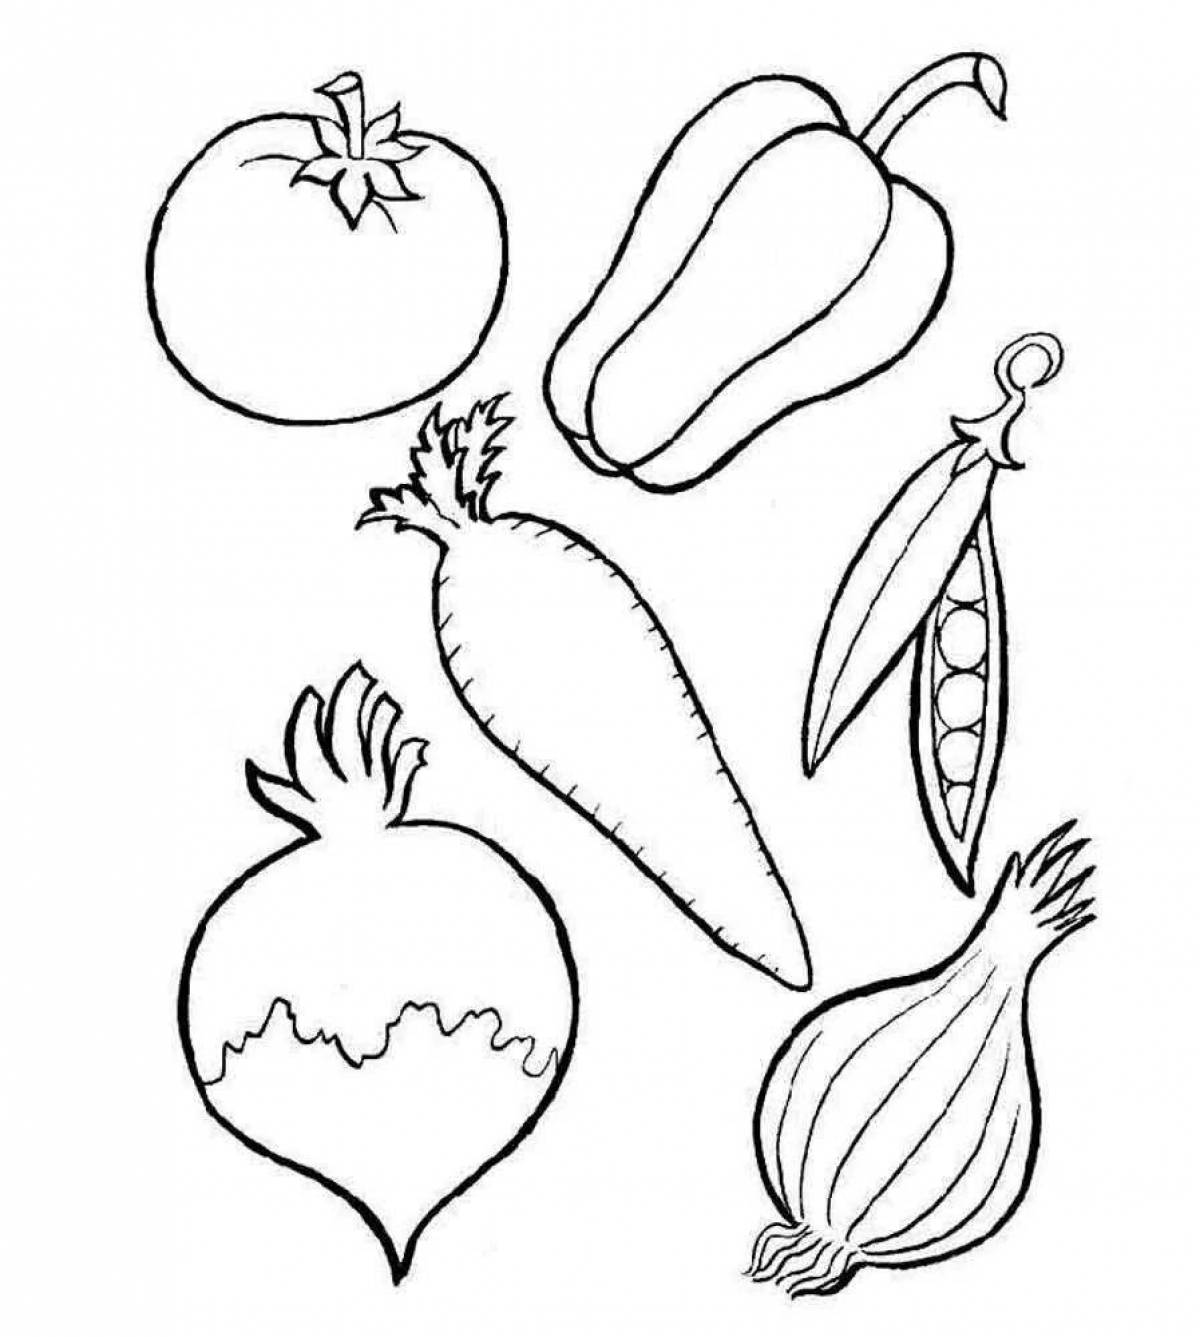 Coloring book grand fruits and vegetables for kids